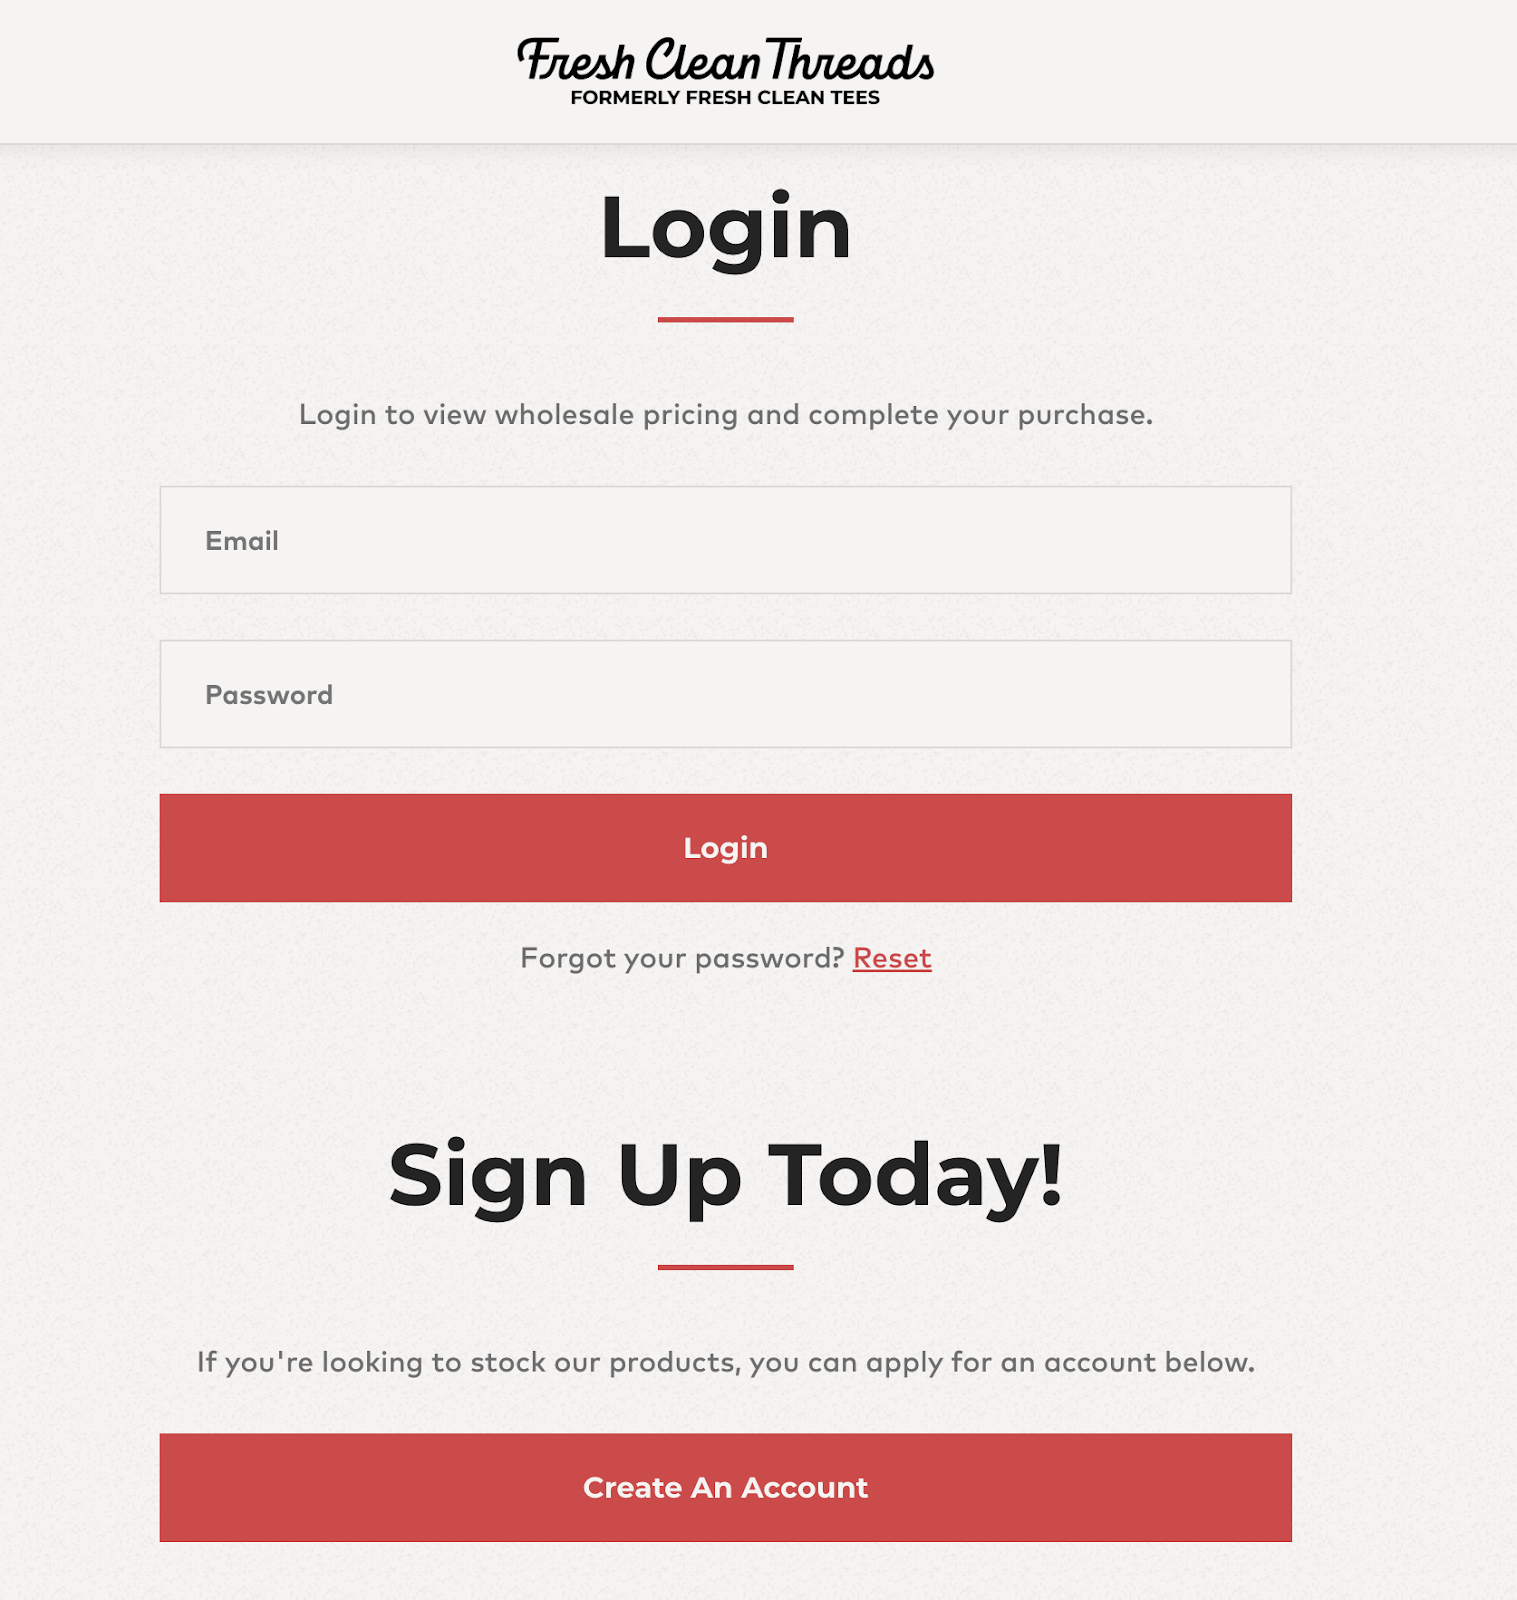 Customer login page from https://wholesale.freshcleantees.com